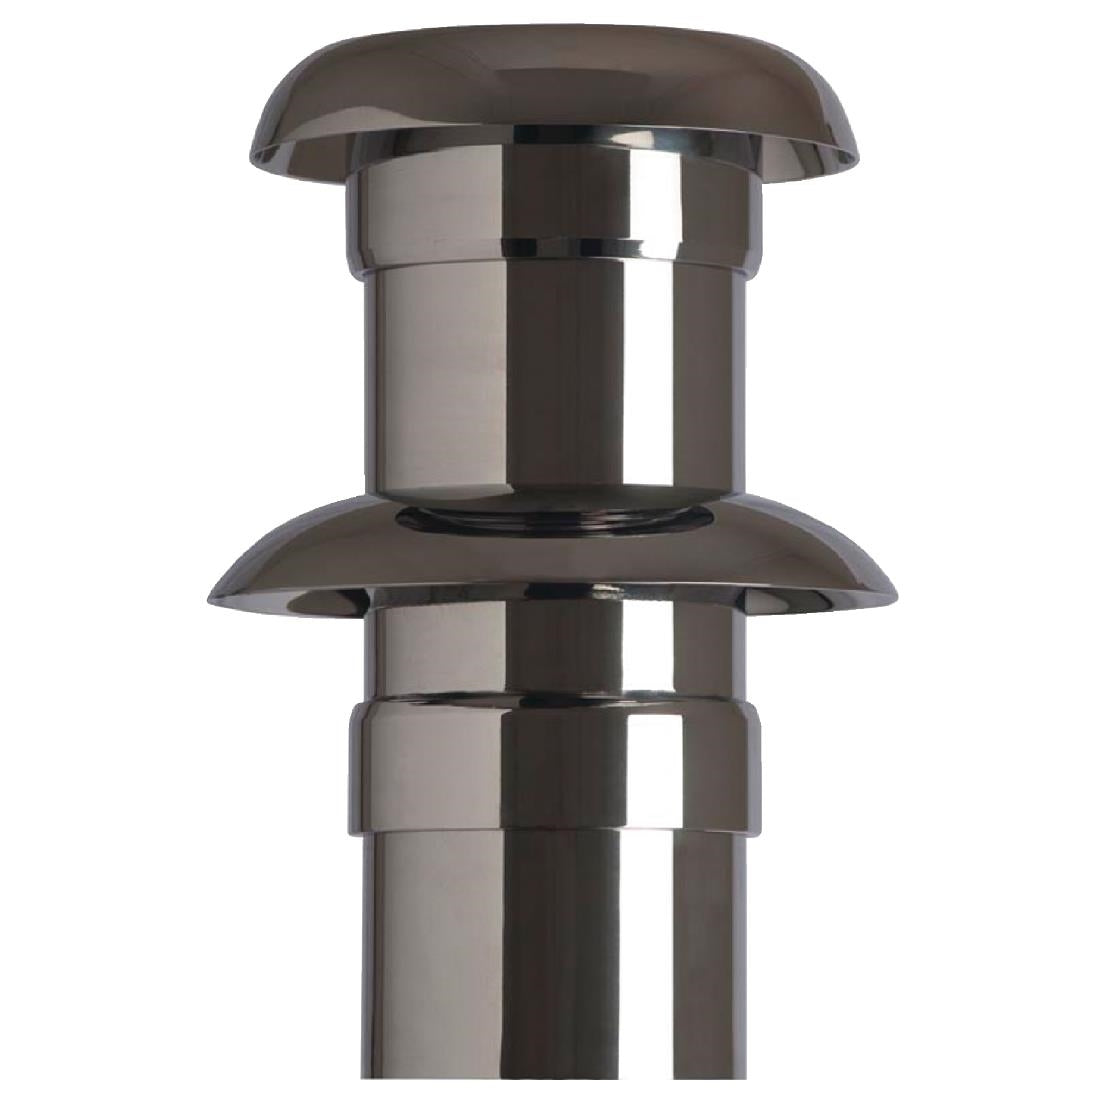 DN675 JM Posner Chocolate Fountain SQ3 JD Catering Equipment Solutions Ltd